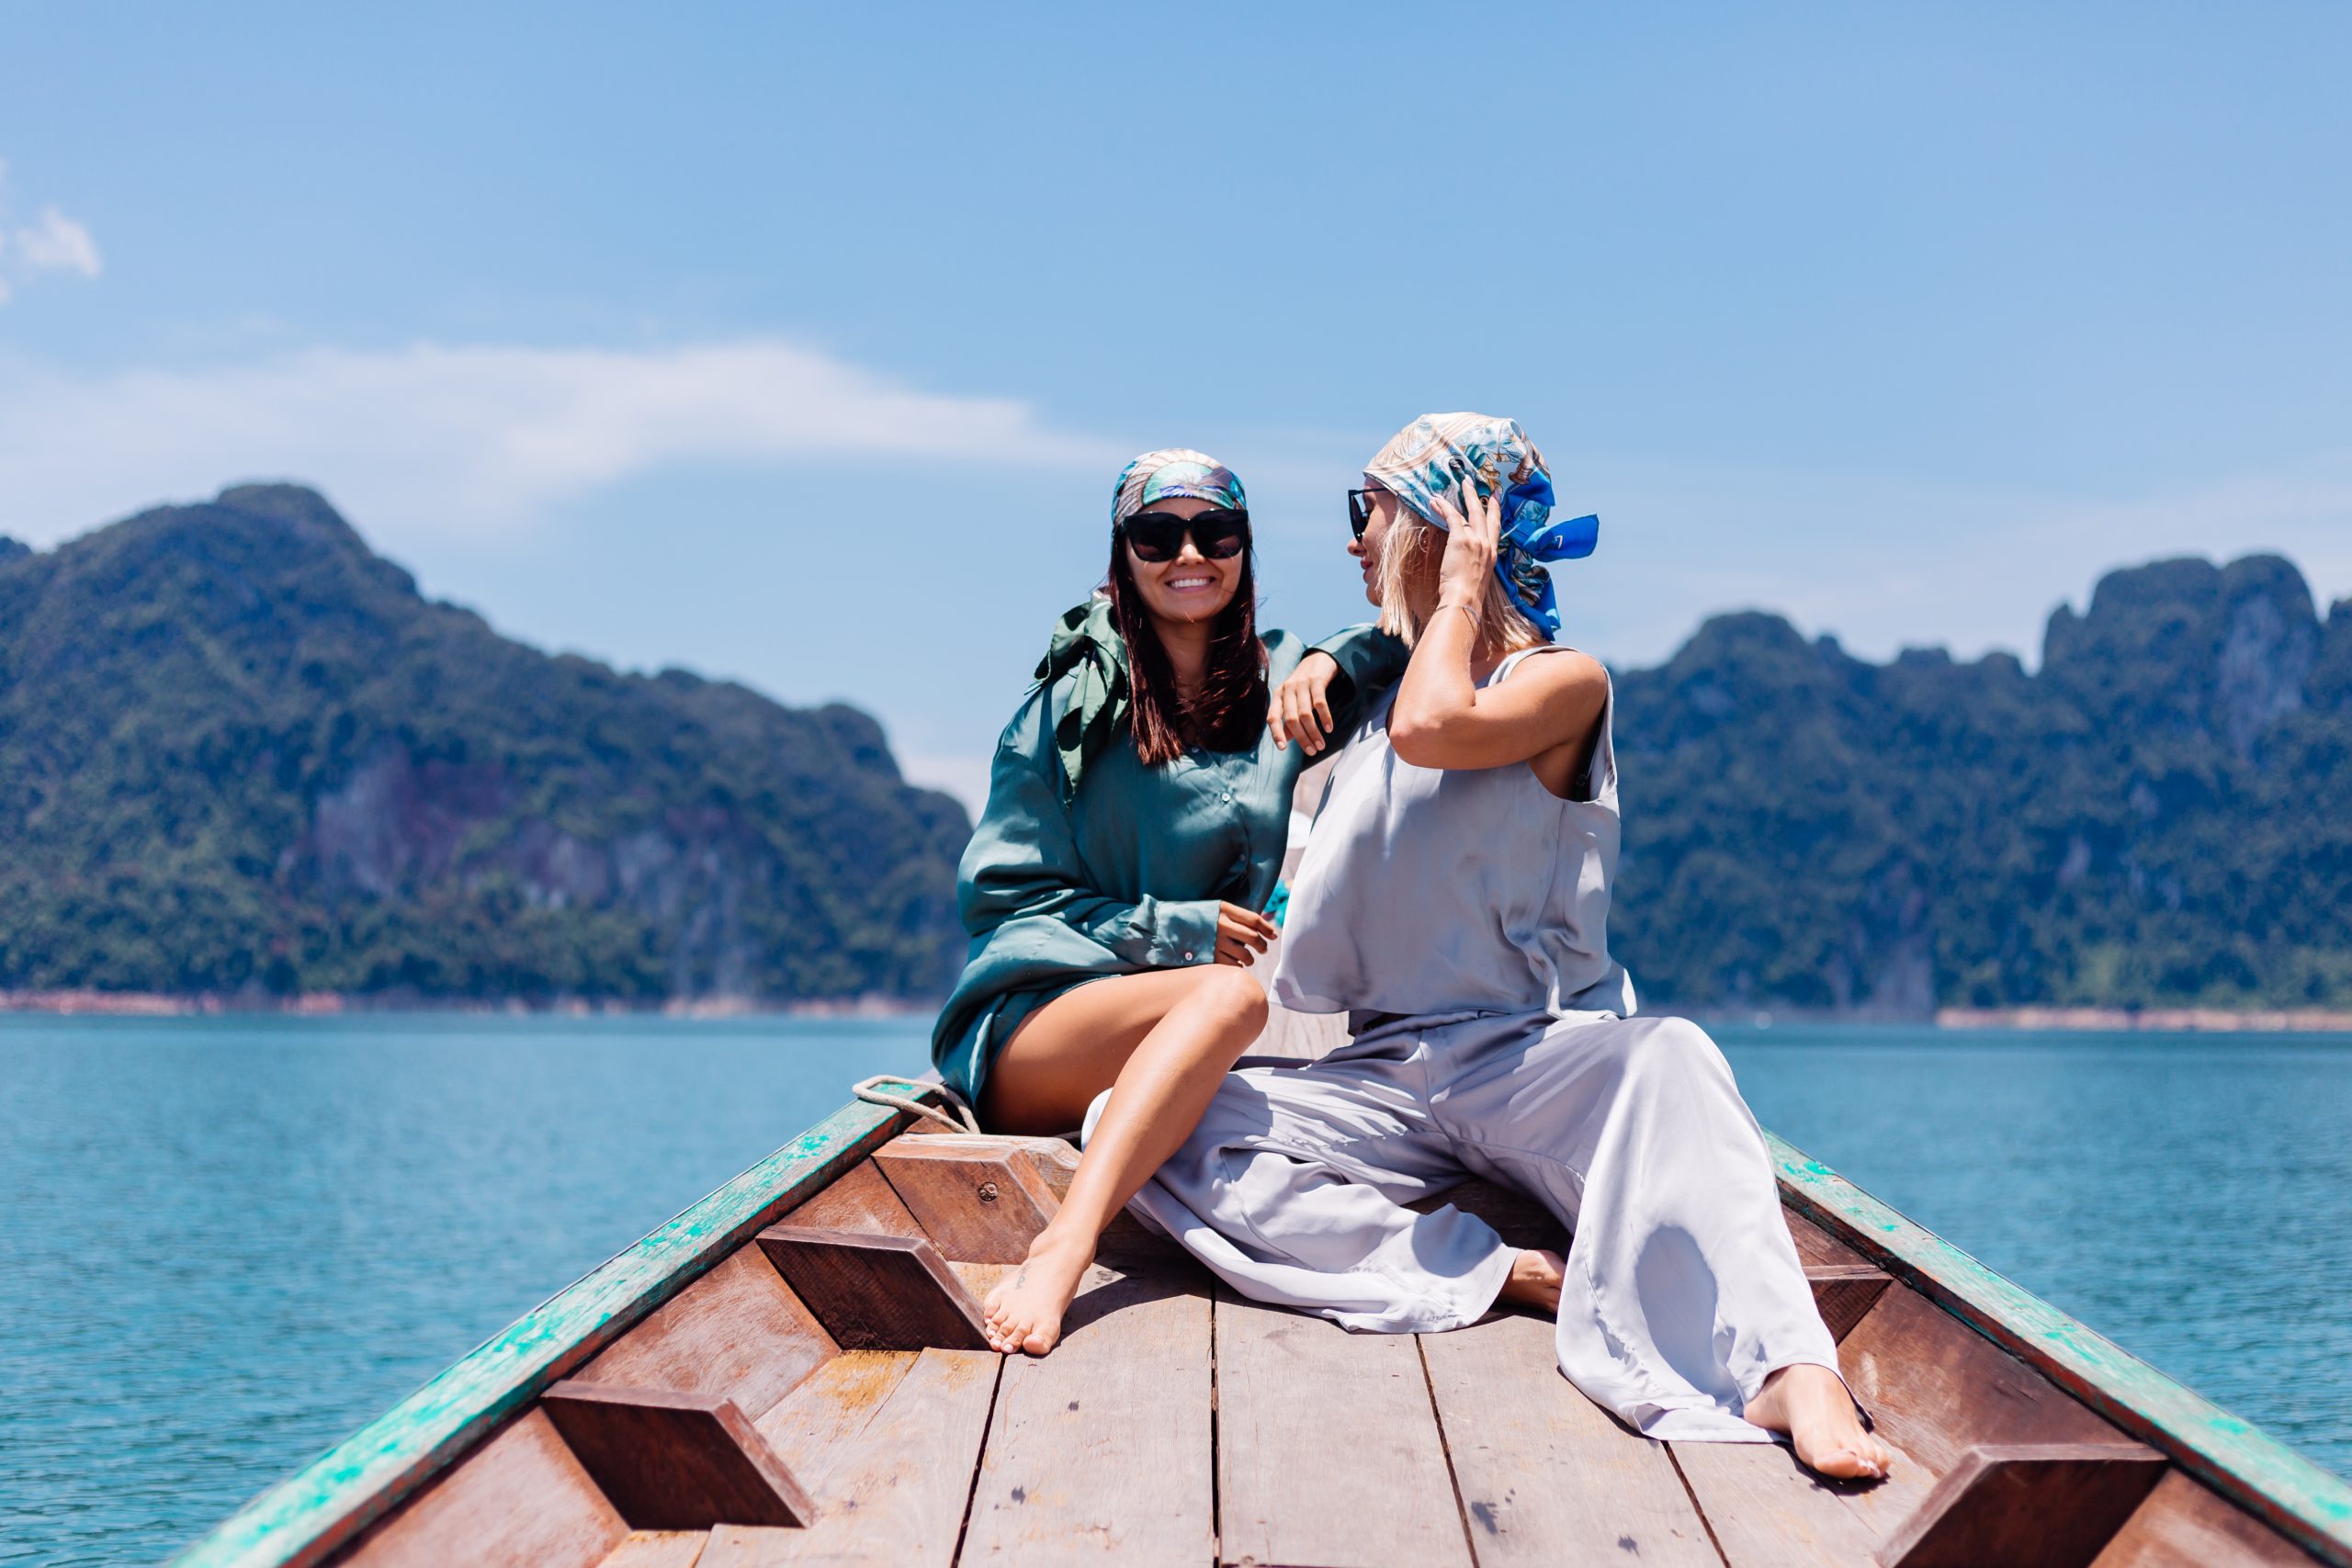 https://bizzplushq.com/wp-content/uploads/2023/12/two-happy-woman-blogger-tourist-friends-silk-suit-scarf-sunglasses-vacation-travel-around-thailand-asian-boat-khao-sok-national-park-scaled.jpg